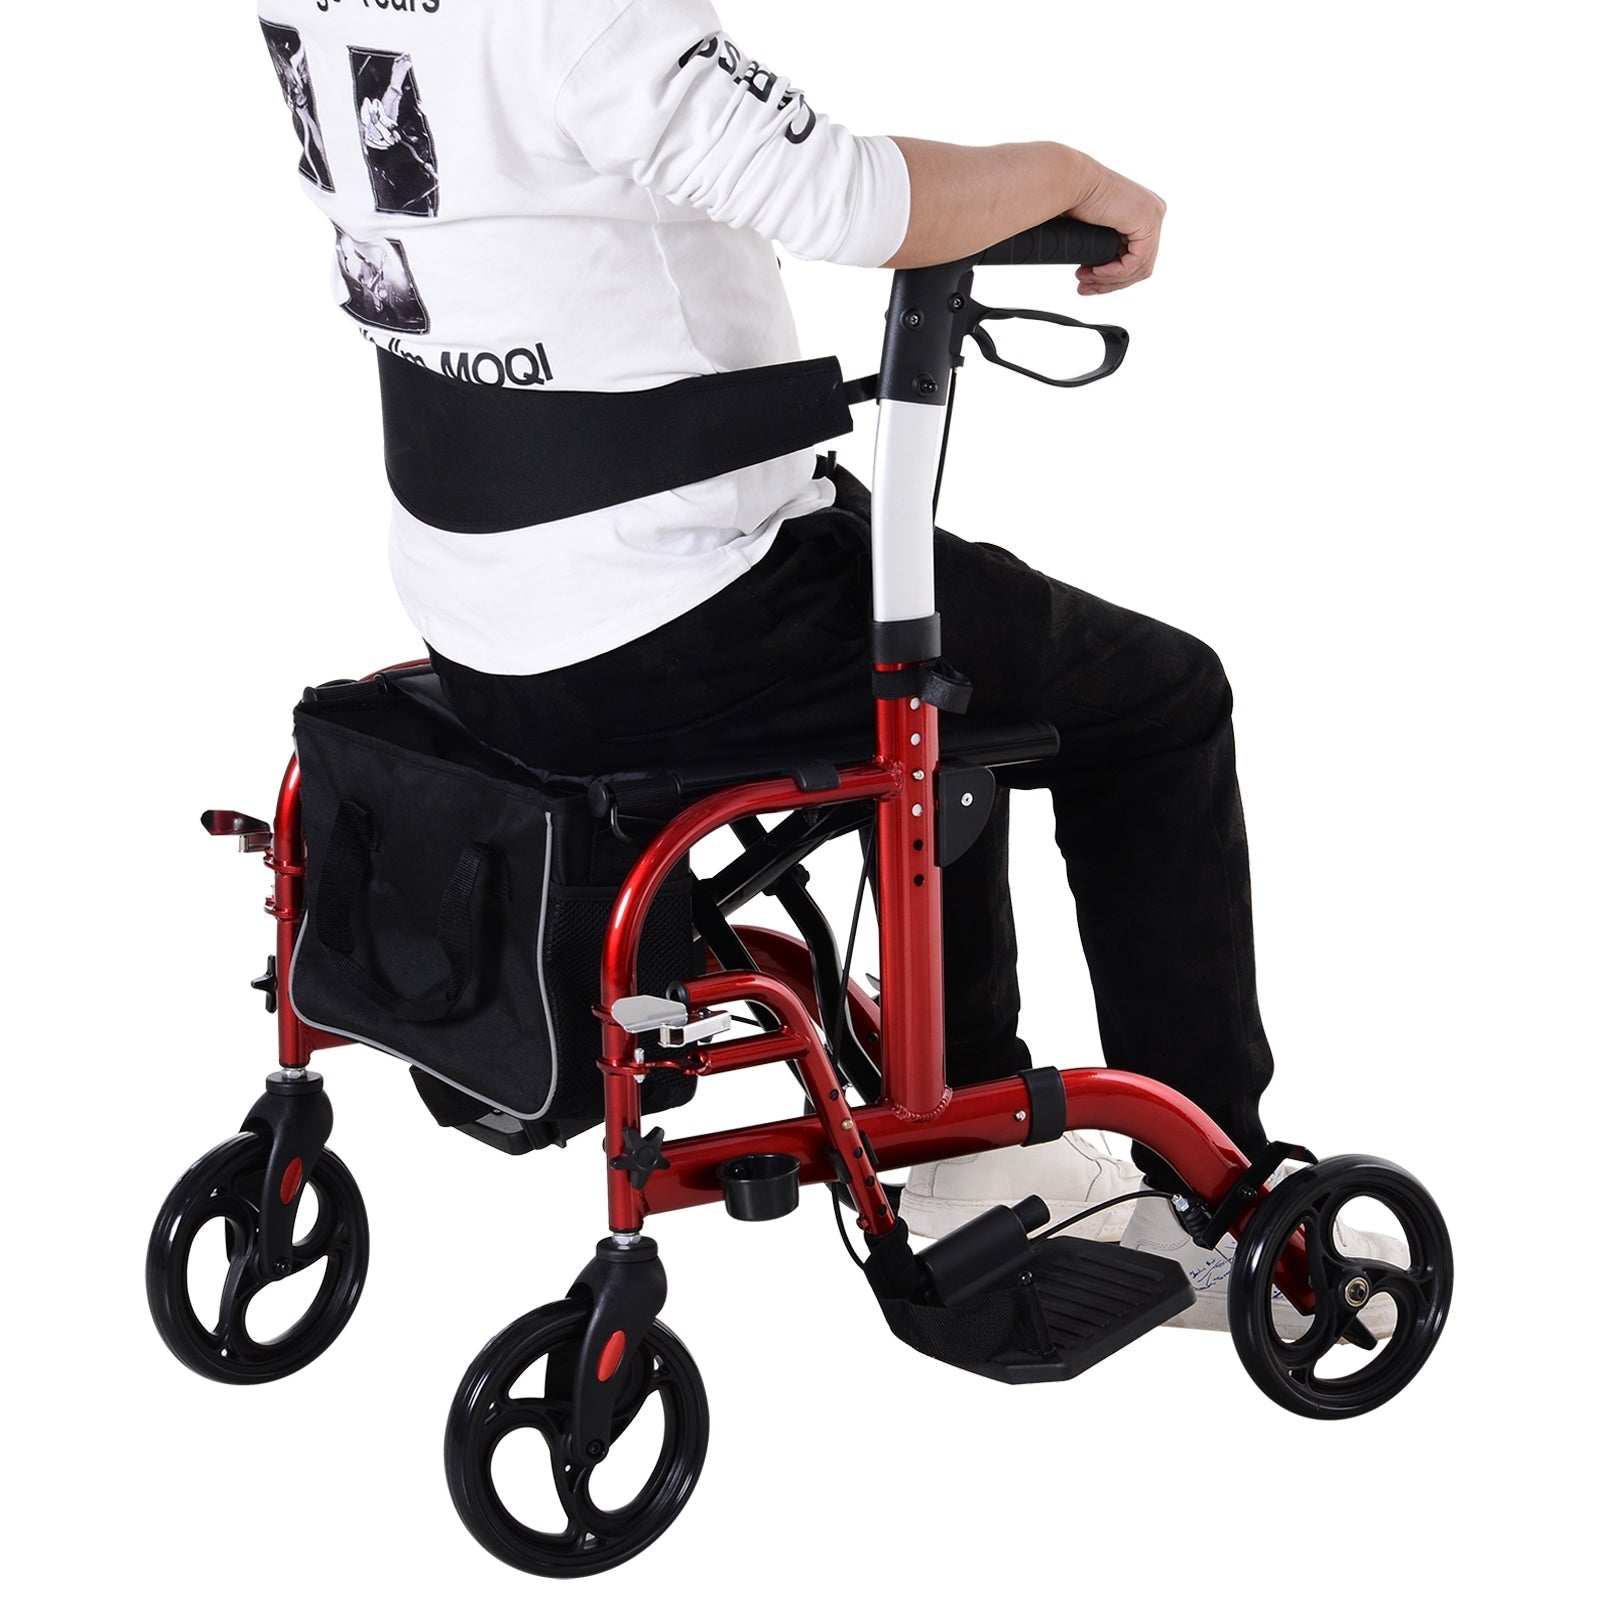 2 in 1 Aluminum Rollator Walker Convertible Rollator Wheelchair with Adjustable Arms, Storage Bag, Footrests &; Crutch Holder, Tool Free Assembly, Black &; Red at Gallery Canada